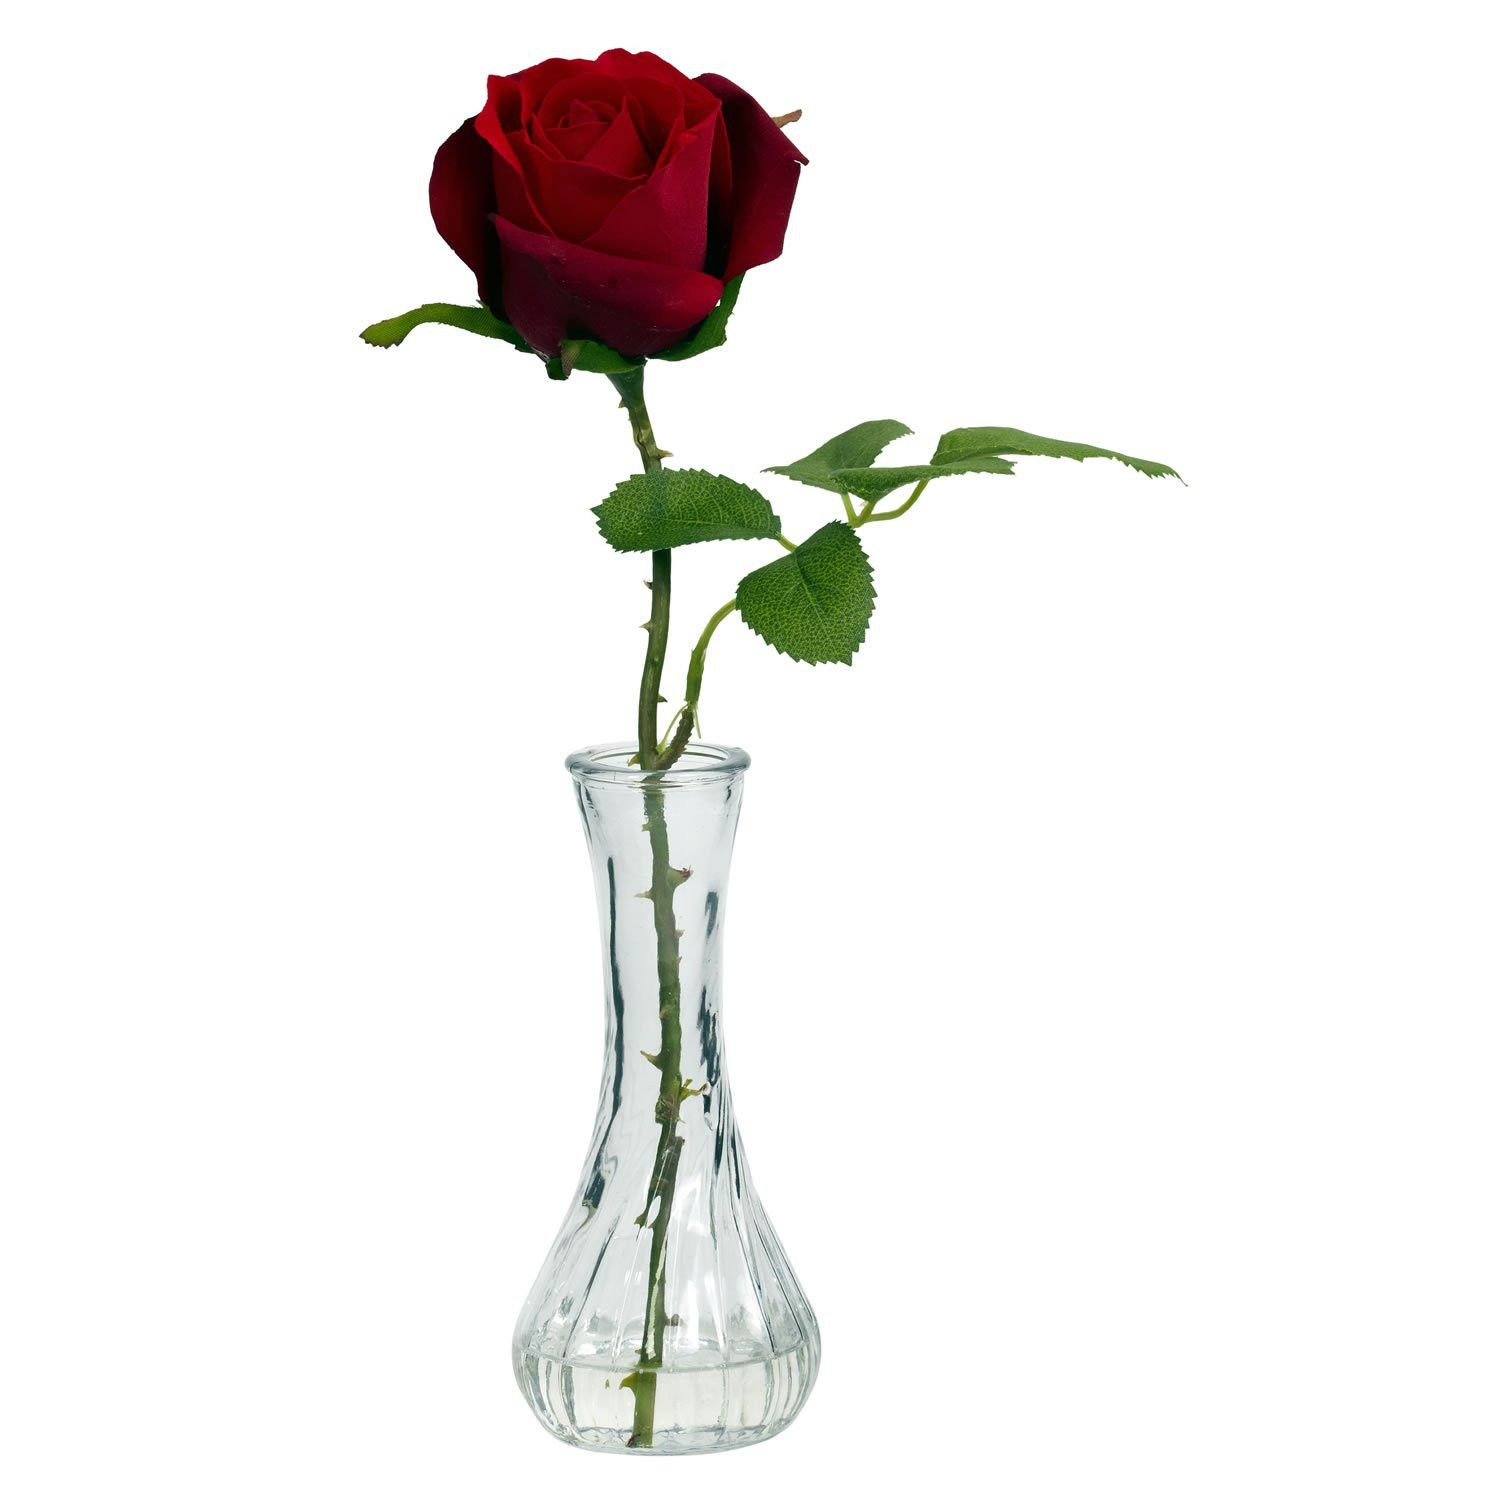 24 Stylish Red Flowers In Vase 2024 free download red flowers in vase of pictures of roses in a vase inspirational vase redh vases single throughout pictures of roses in a vase inspirational vase redh vases single rose in vasei 0d a